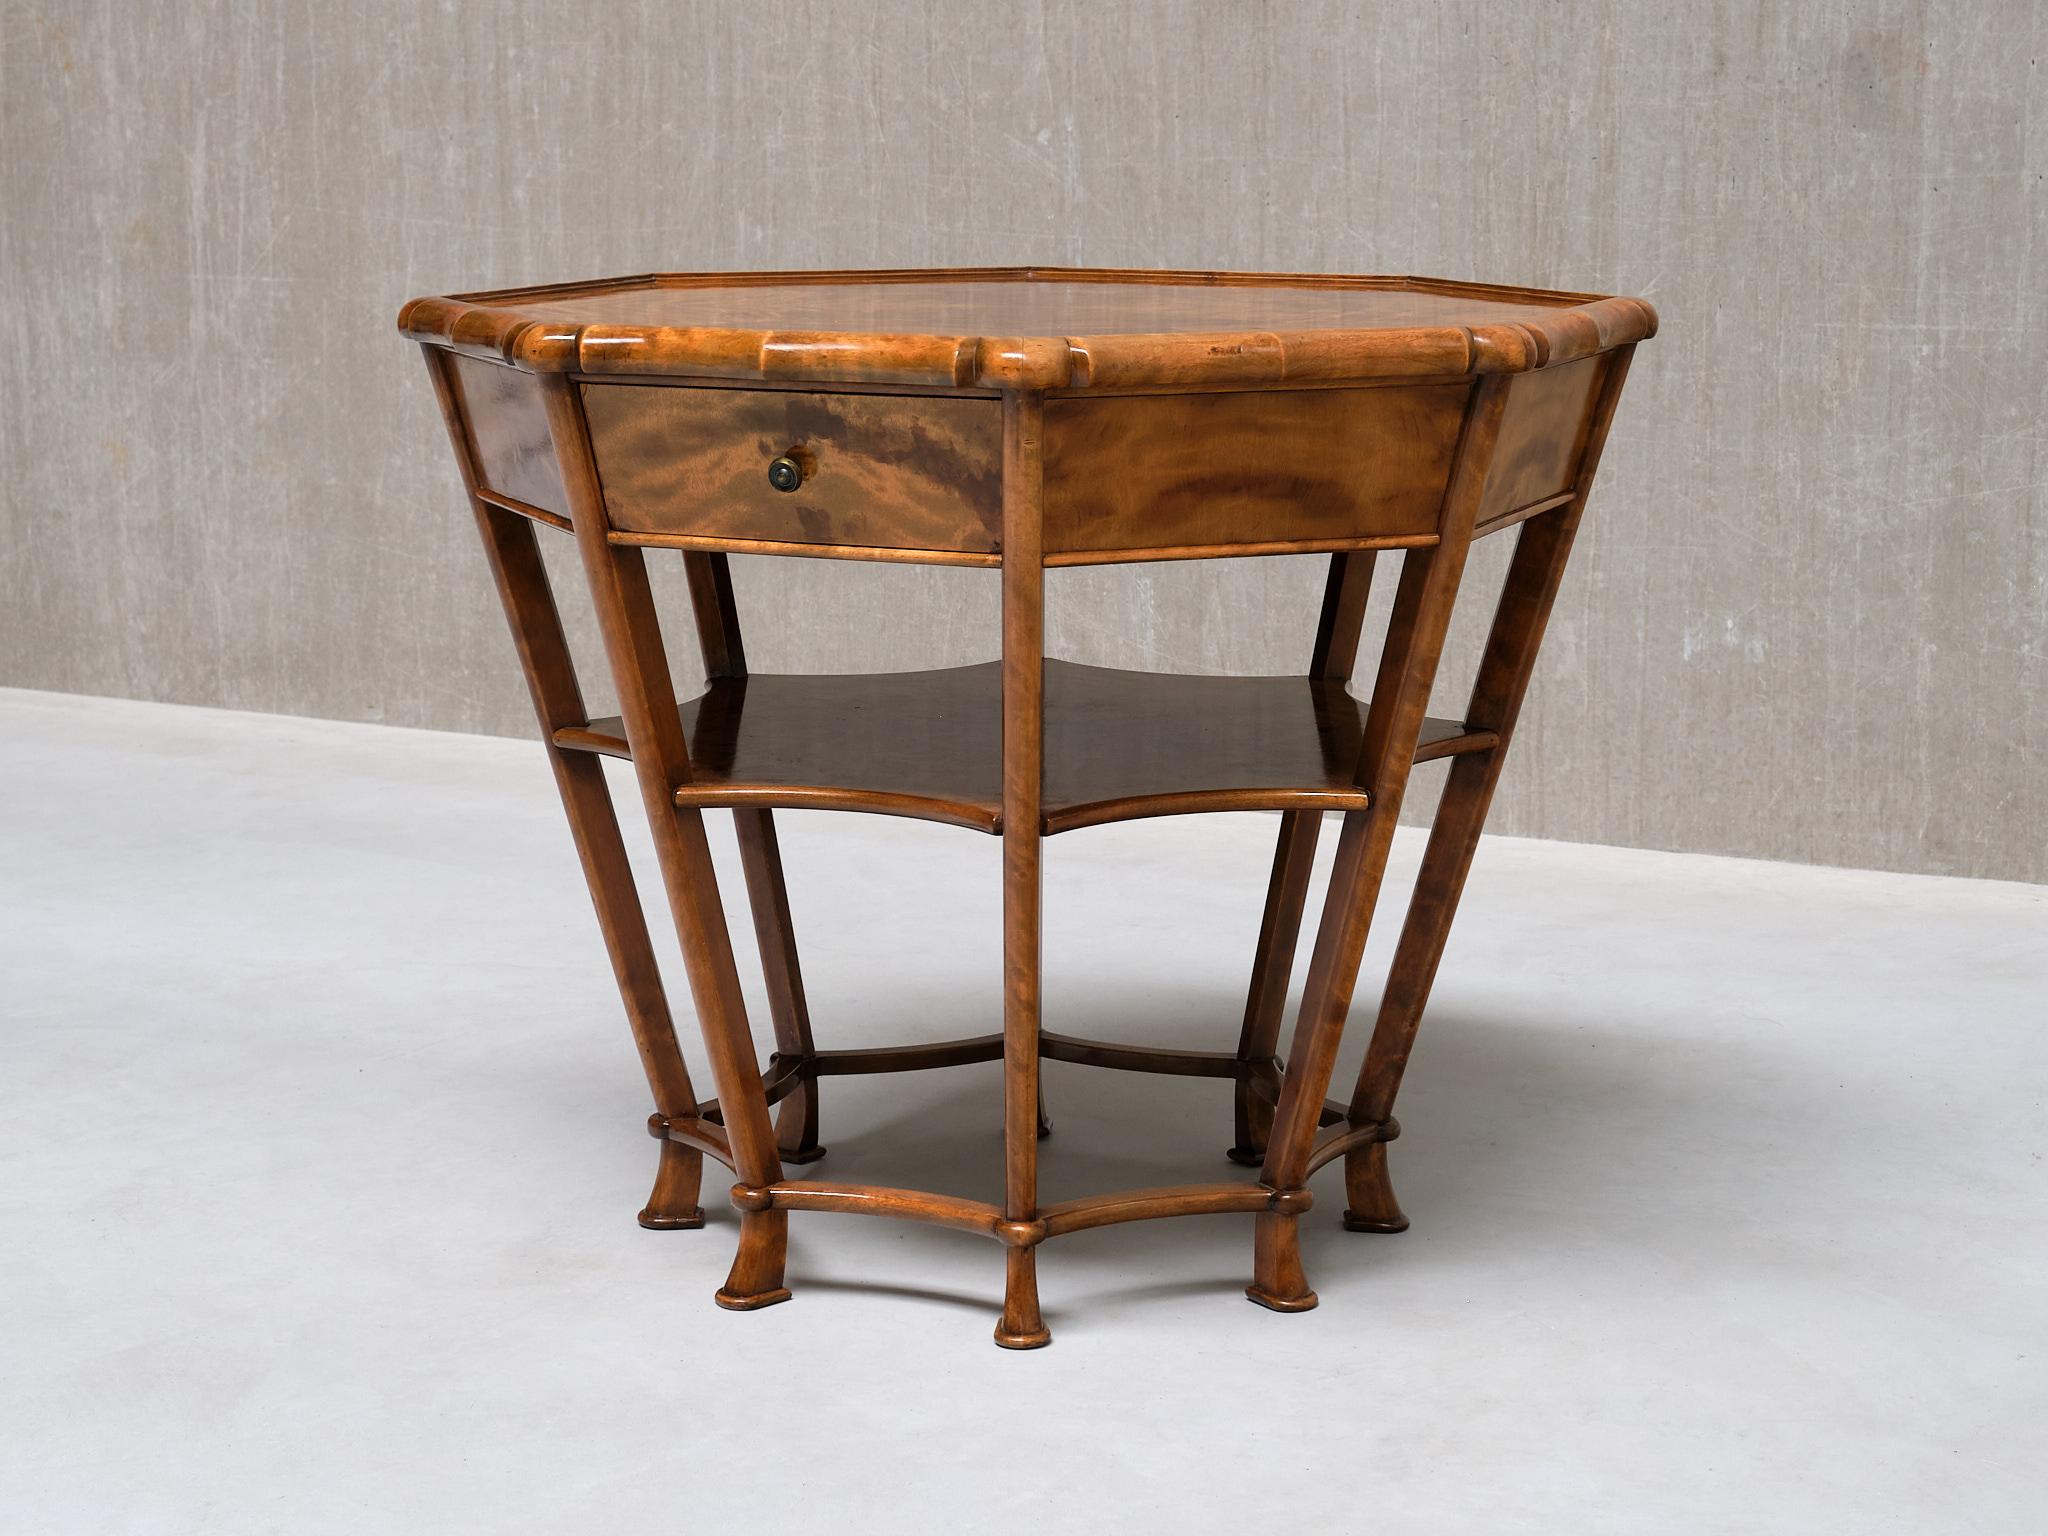 Exceptional Expressionist Octagonal Center Table in Flamed Birch, Germany, 1920s In Good Condition For Sale In The Hague, NL